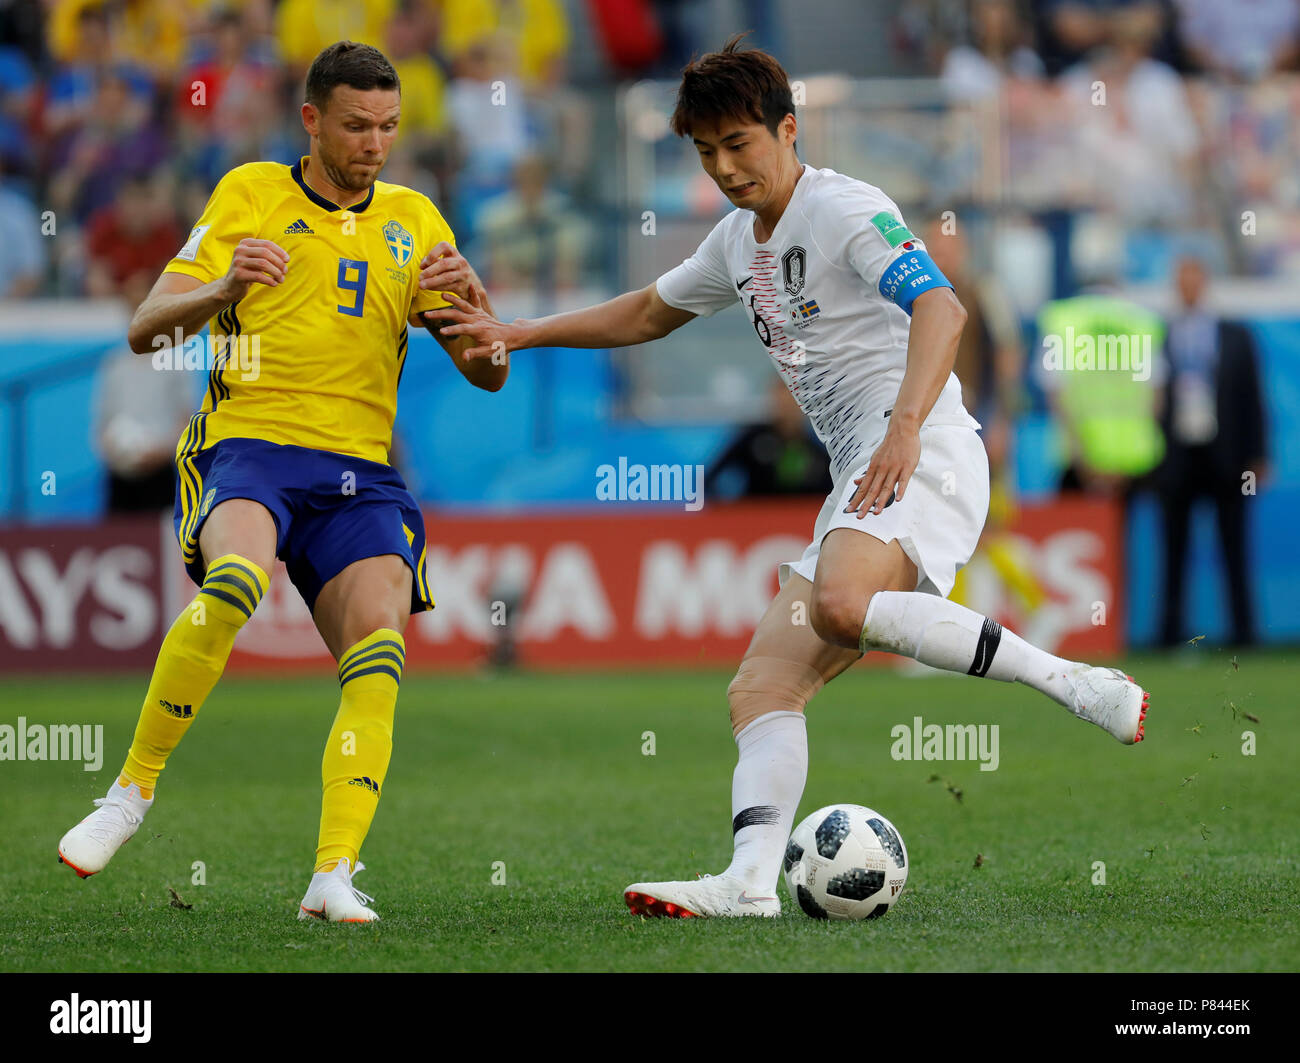 NIZHNY NOVGOROD, RUSSIA - JUNE 18: Marcus Berg (L) of Sweden national team and Sungyueng Ki of Korea Republic national team vie for the ball during the 2018 FIFA World Cup Russia group F match between Sweden and Korea Republic at Nizhny Novgorod Stadium on June 18, 2018 in Nizhny Novgorod, Russia. Stock Photo